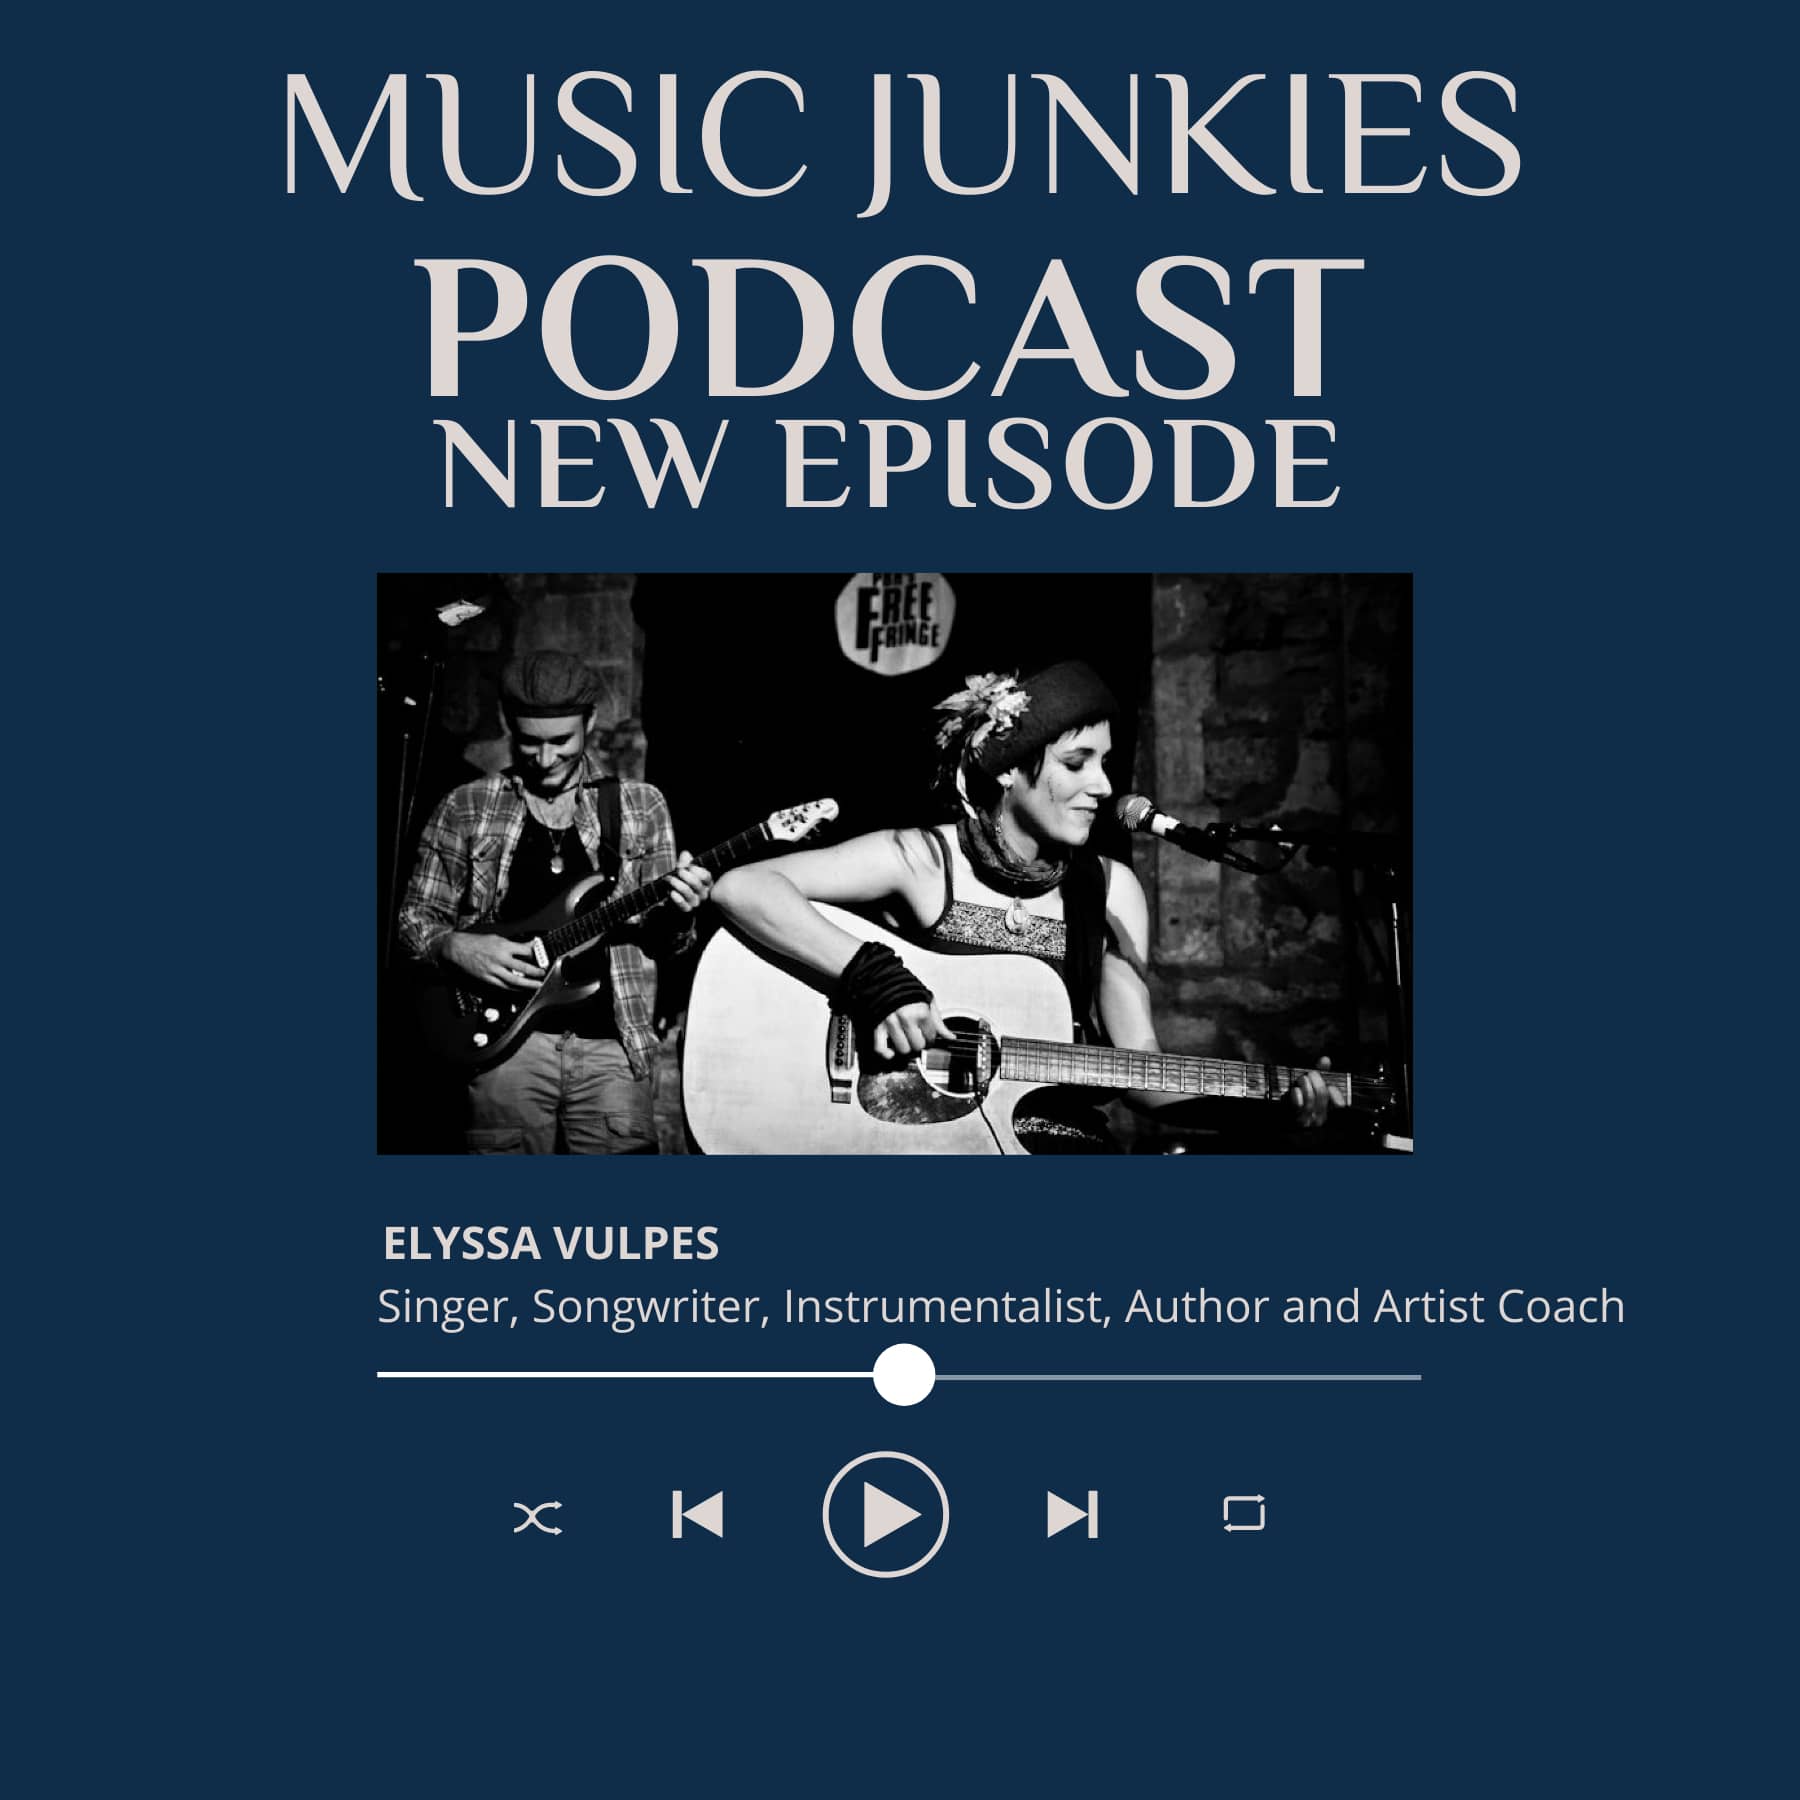 Music Junkies podcast interview with Elyssa Vulpes